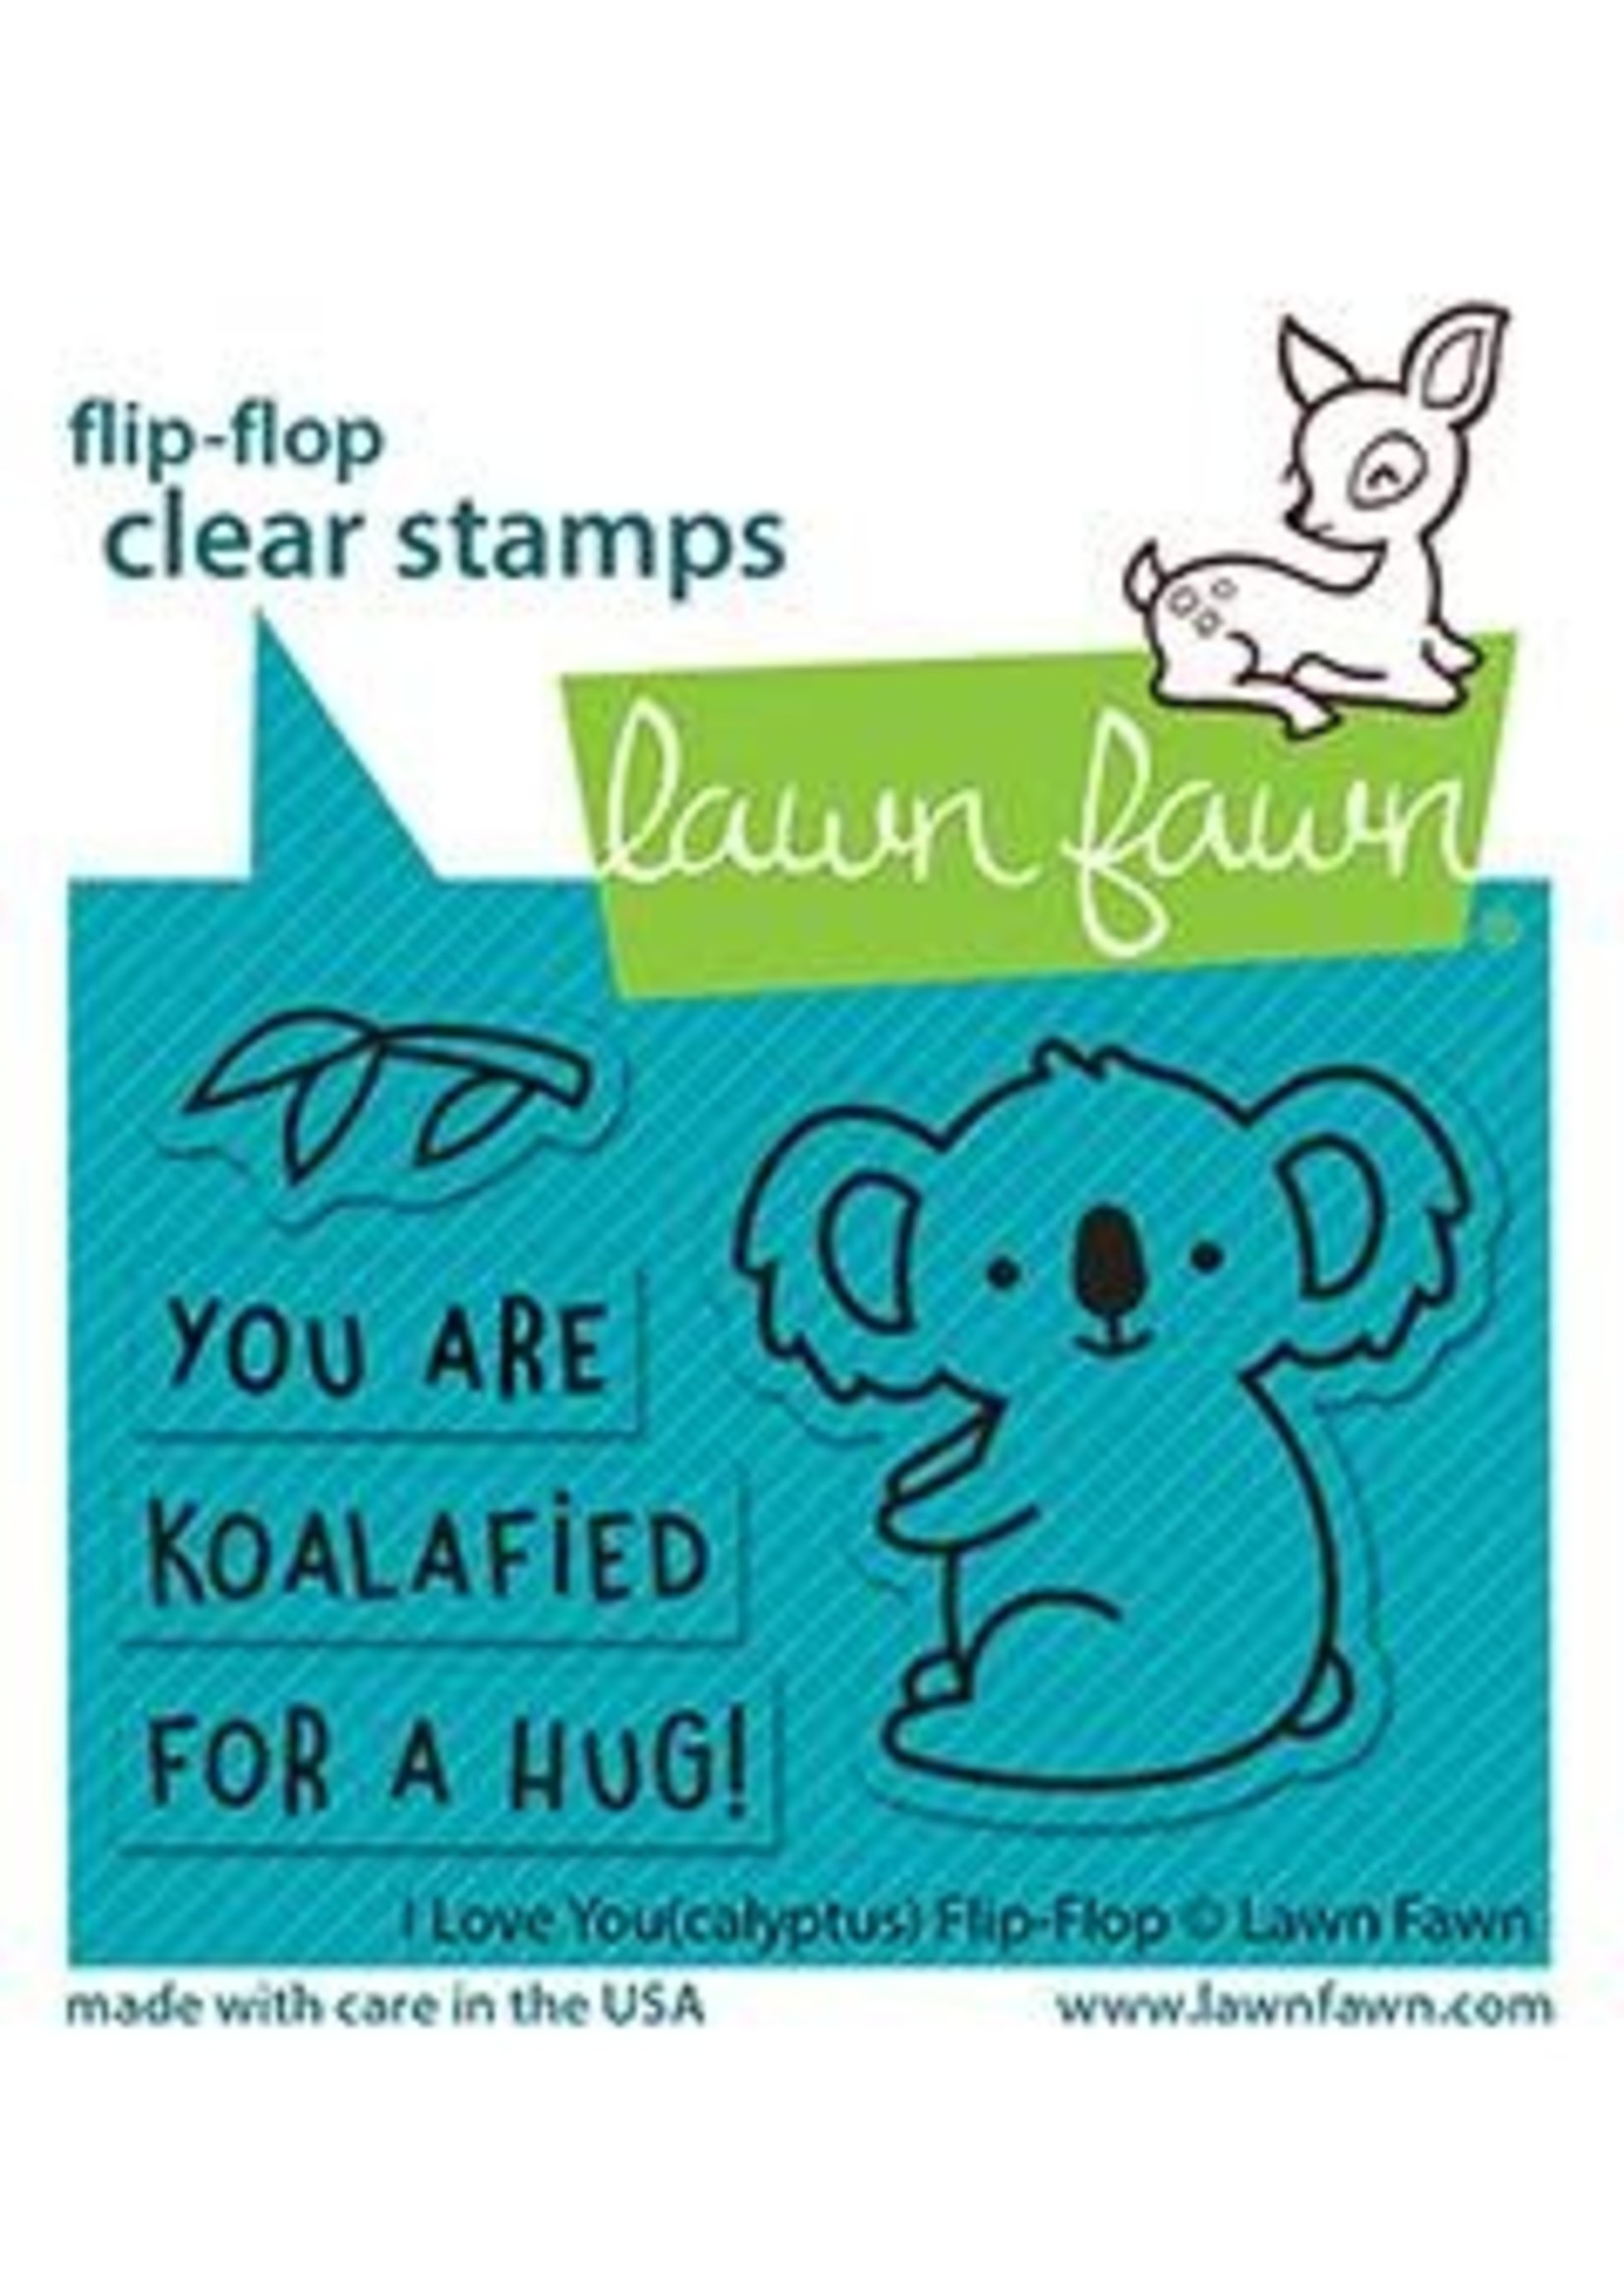 LAWN FAWN I LOVE YOU(calyptus)  FLIP FLOP stamp